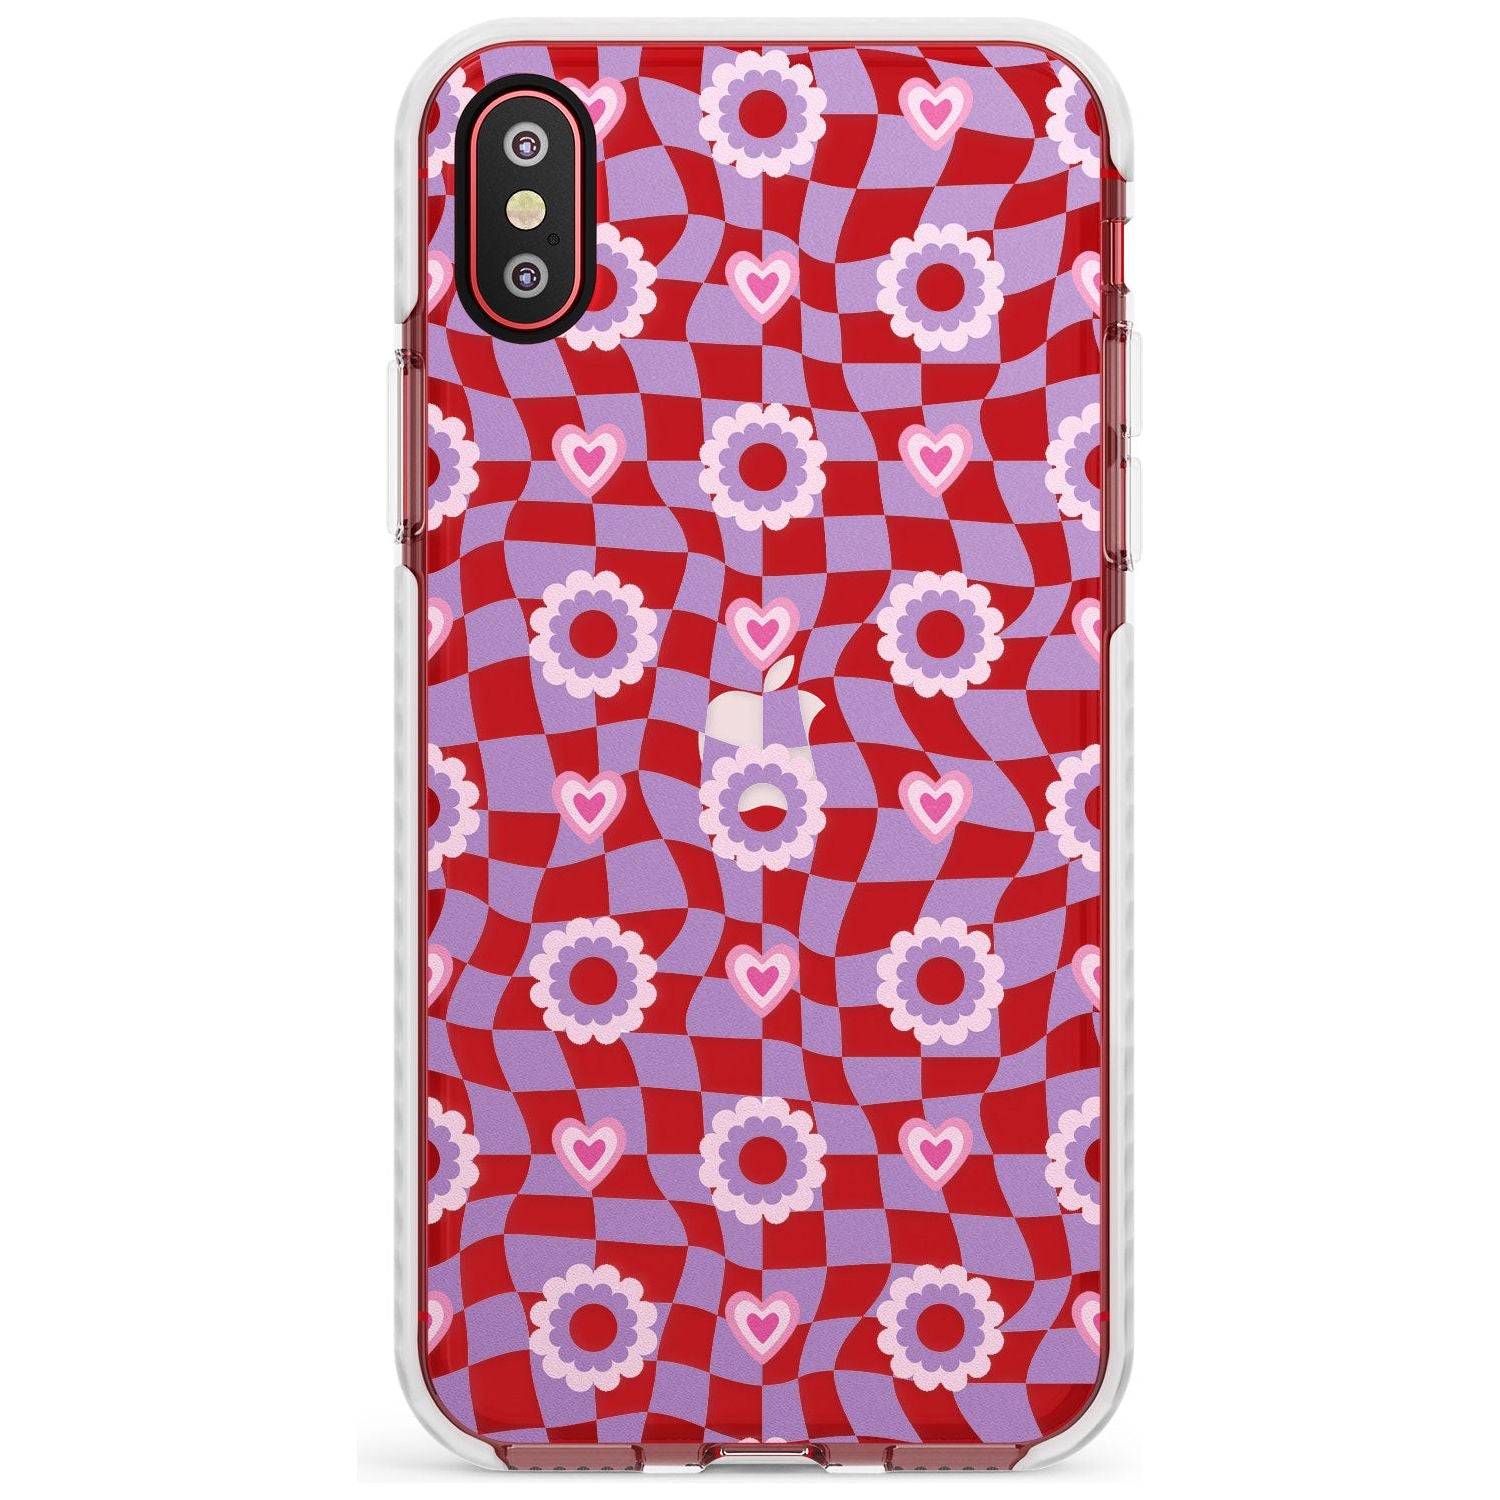 Checkered Love Pattern Impact Phone Case for iPhone X XS Max XR